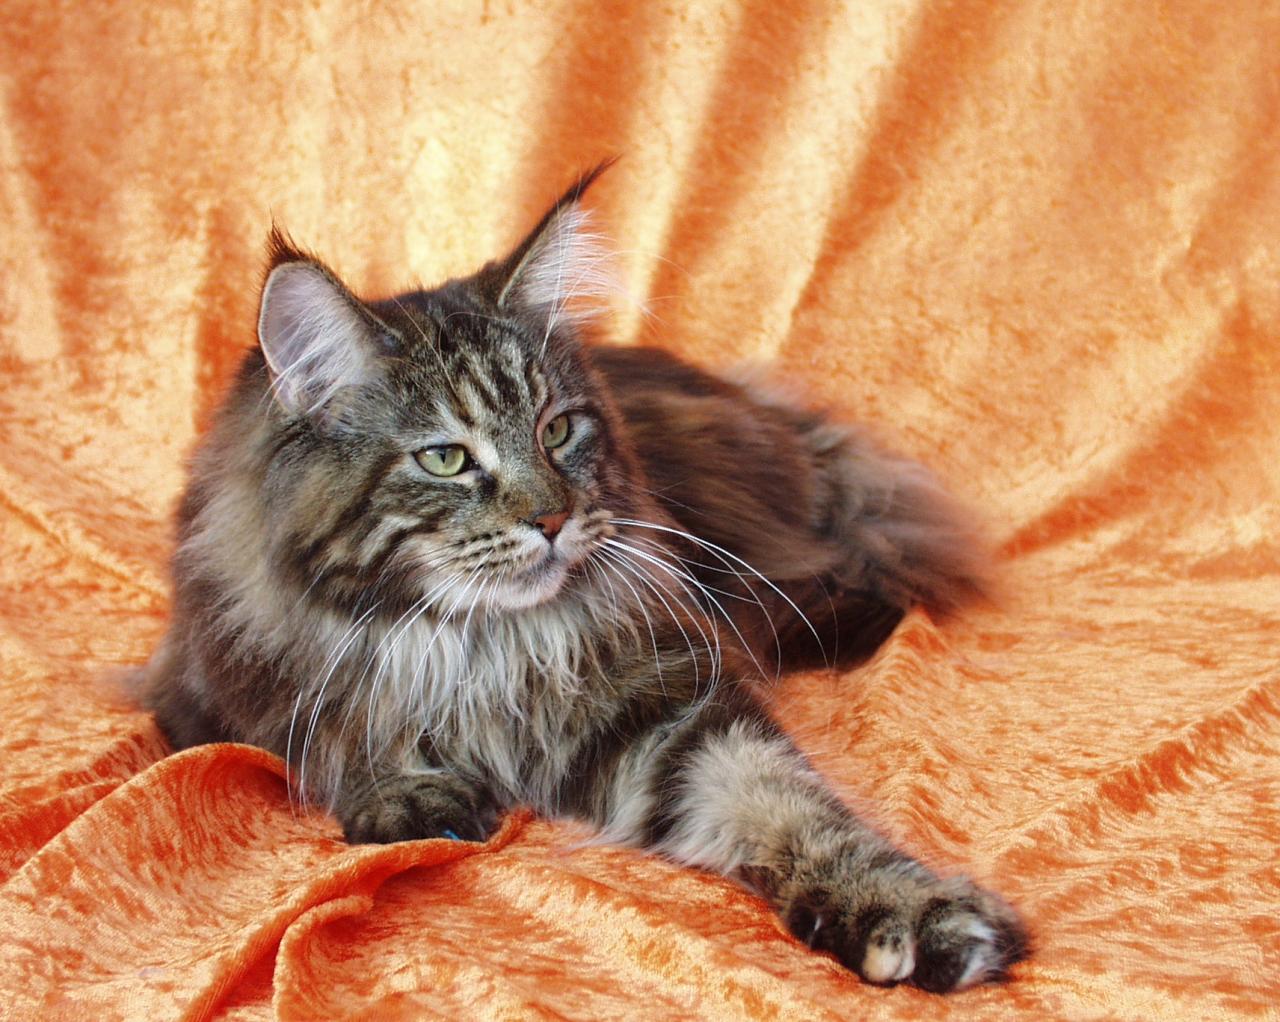 Full breed maine coon for sale